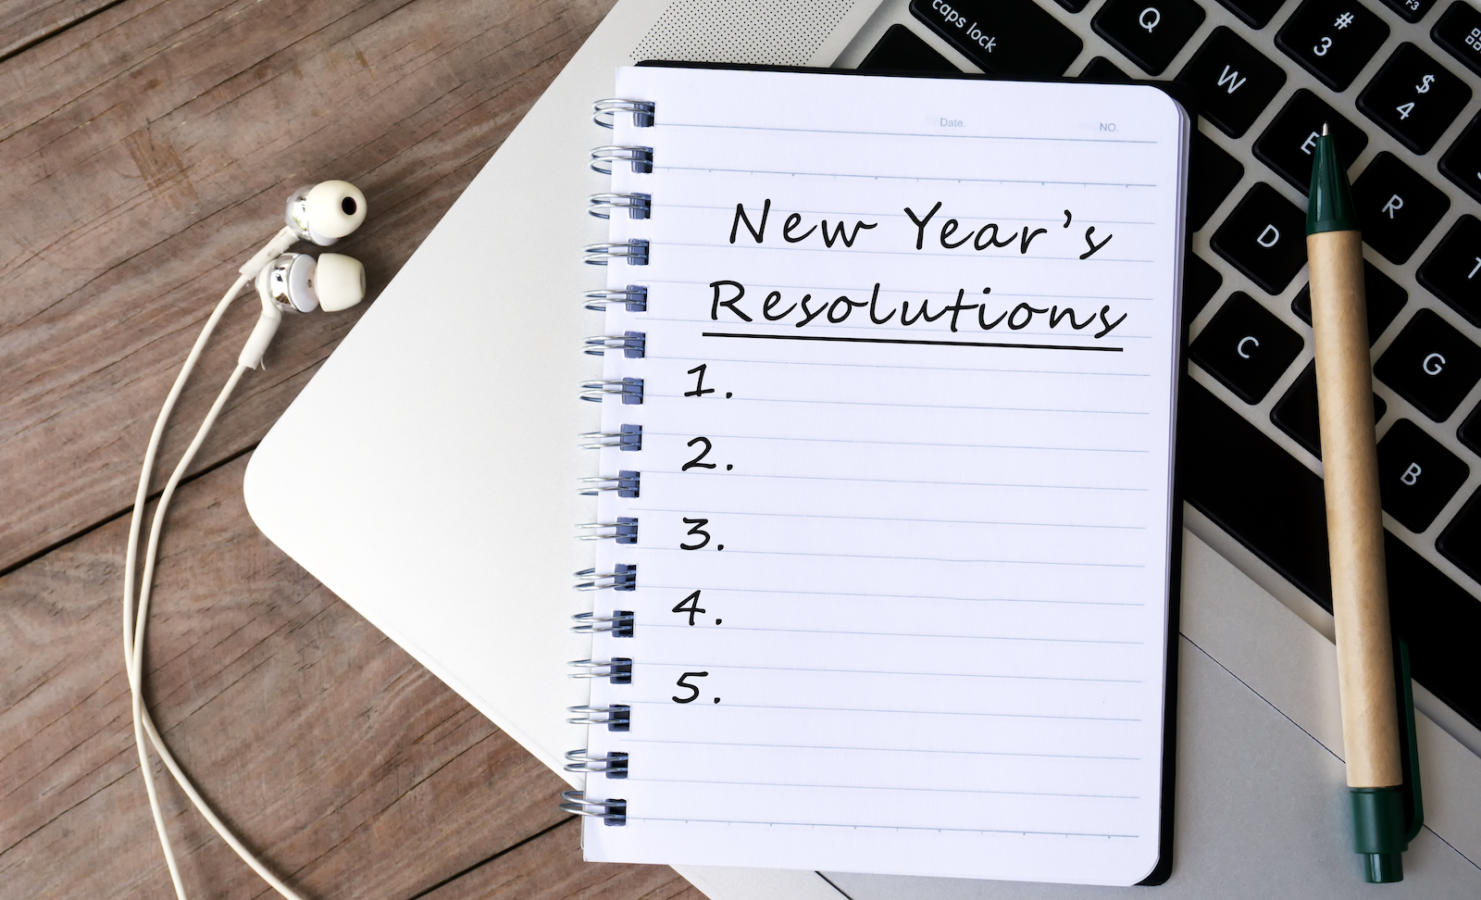 New Year's Resolutions List on Notepad